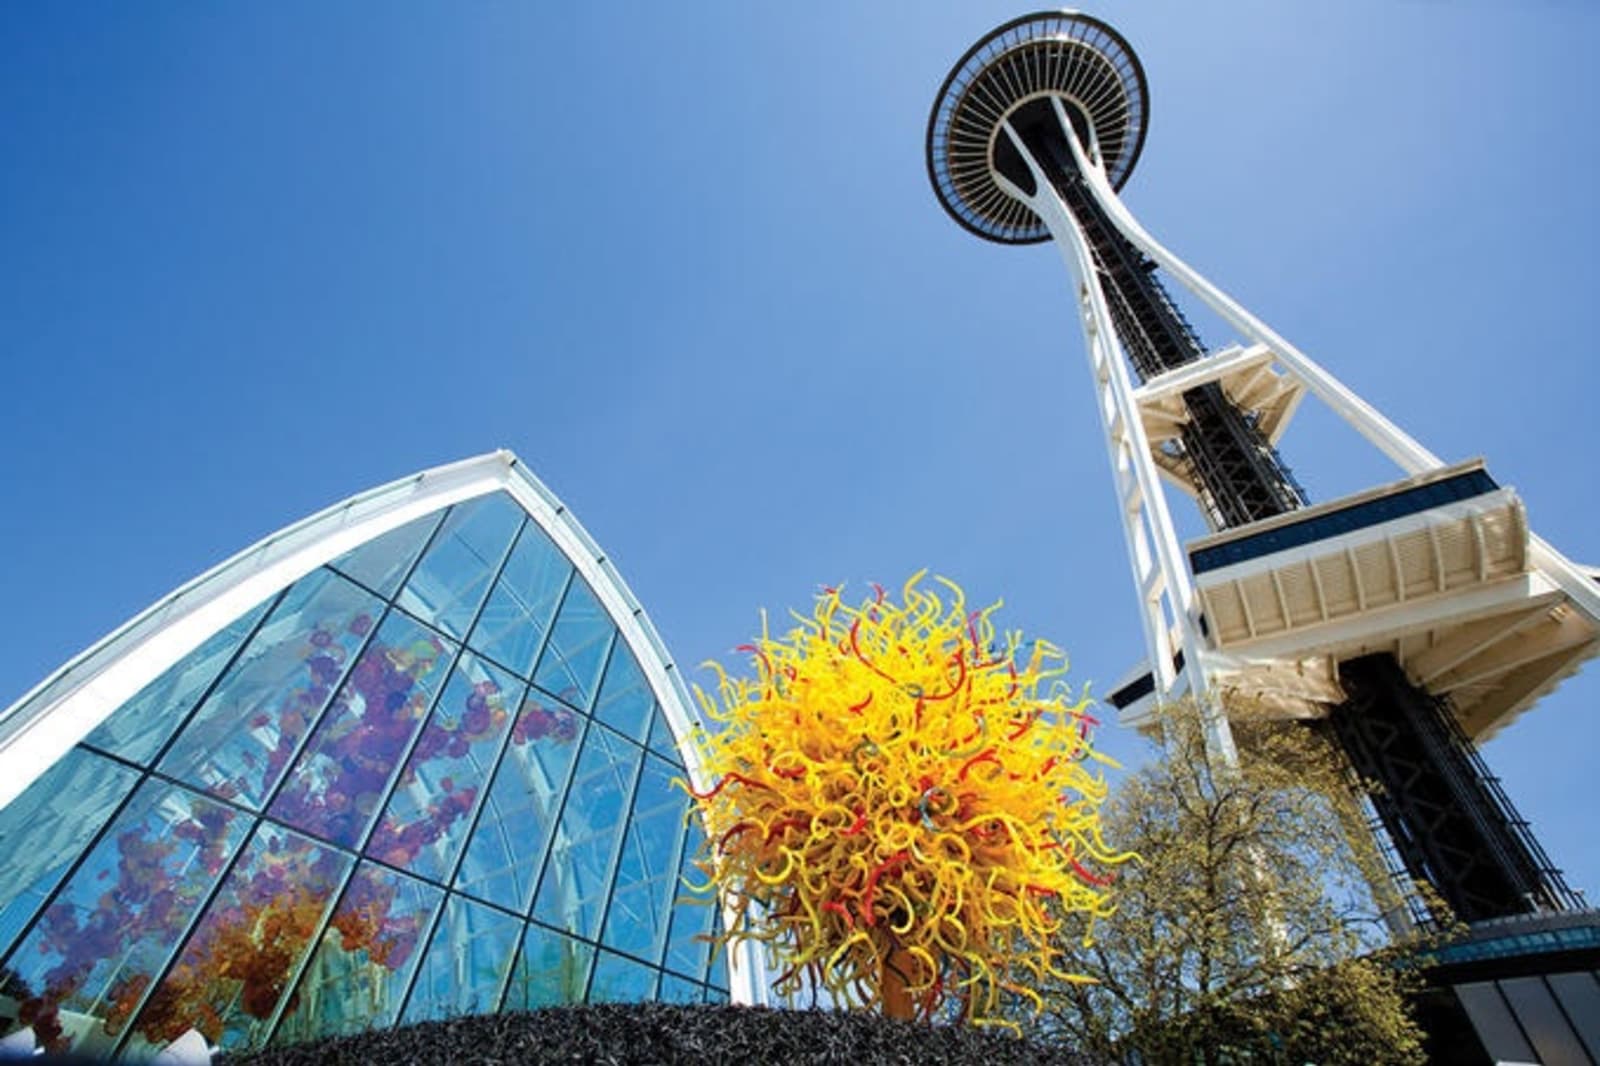 rs-1a.-space-needle-chihuly.jpg